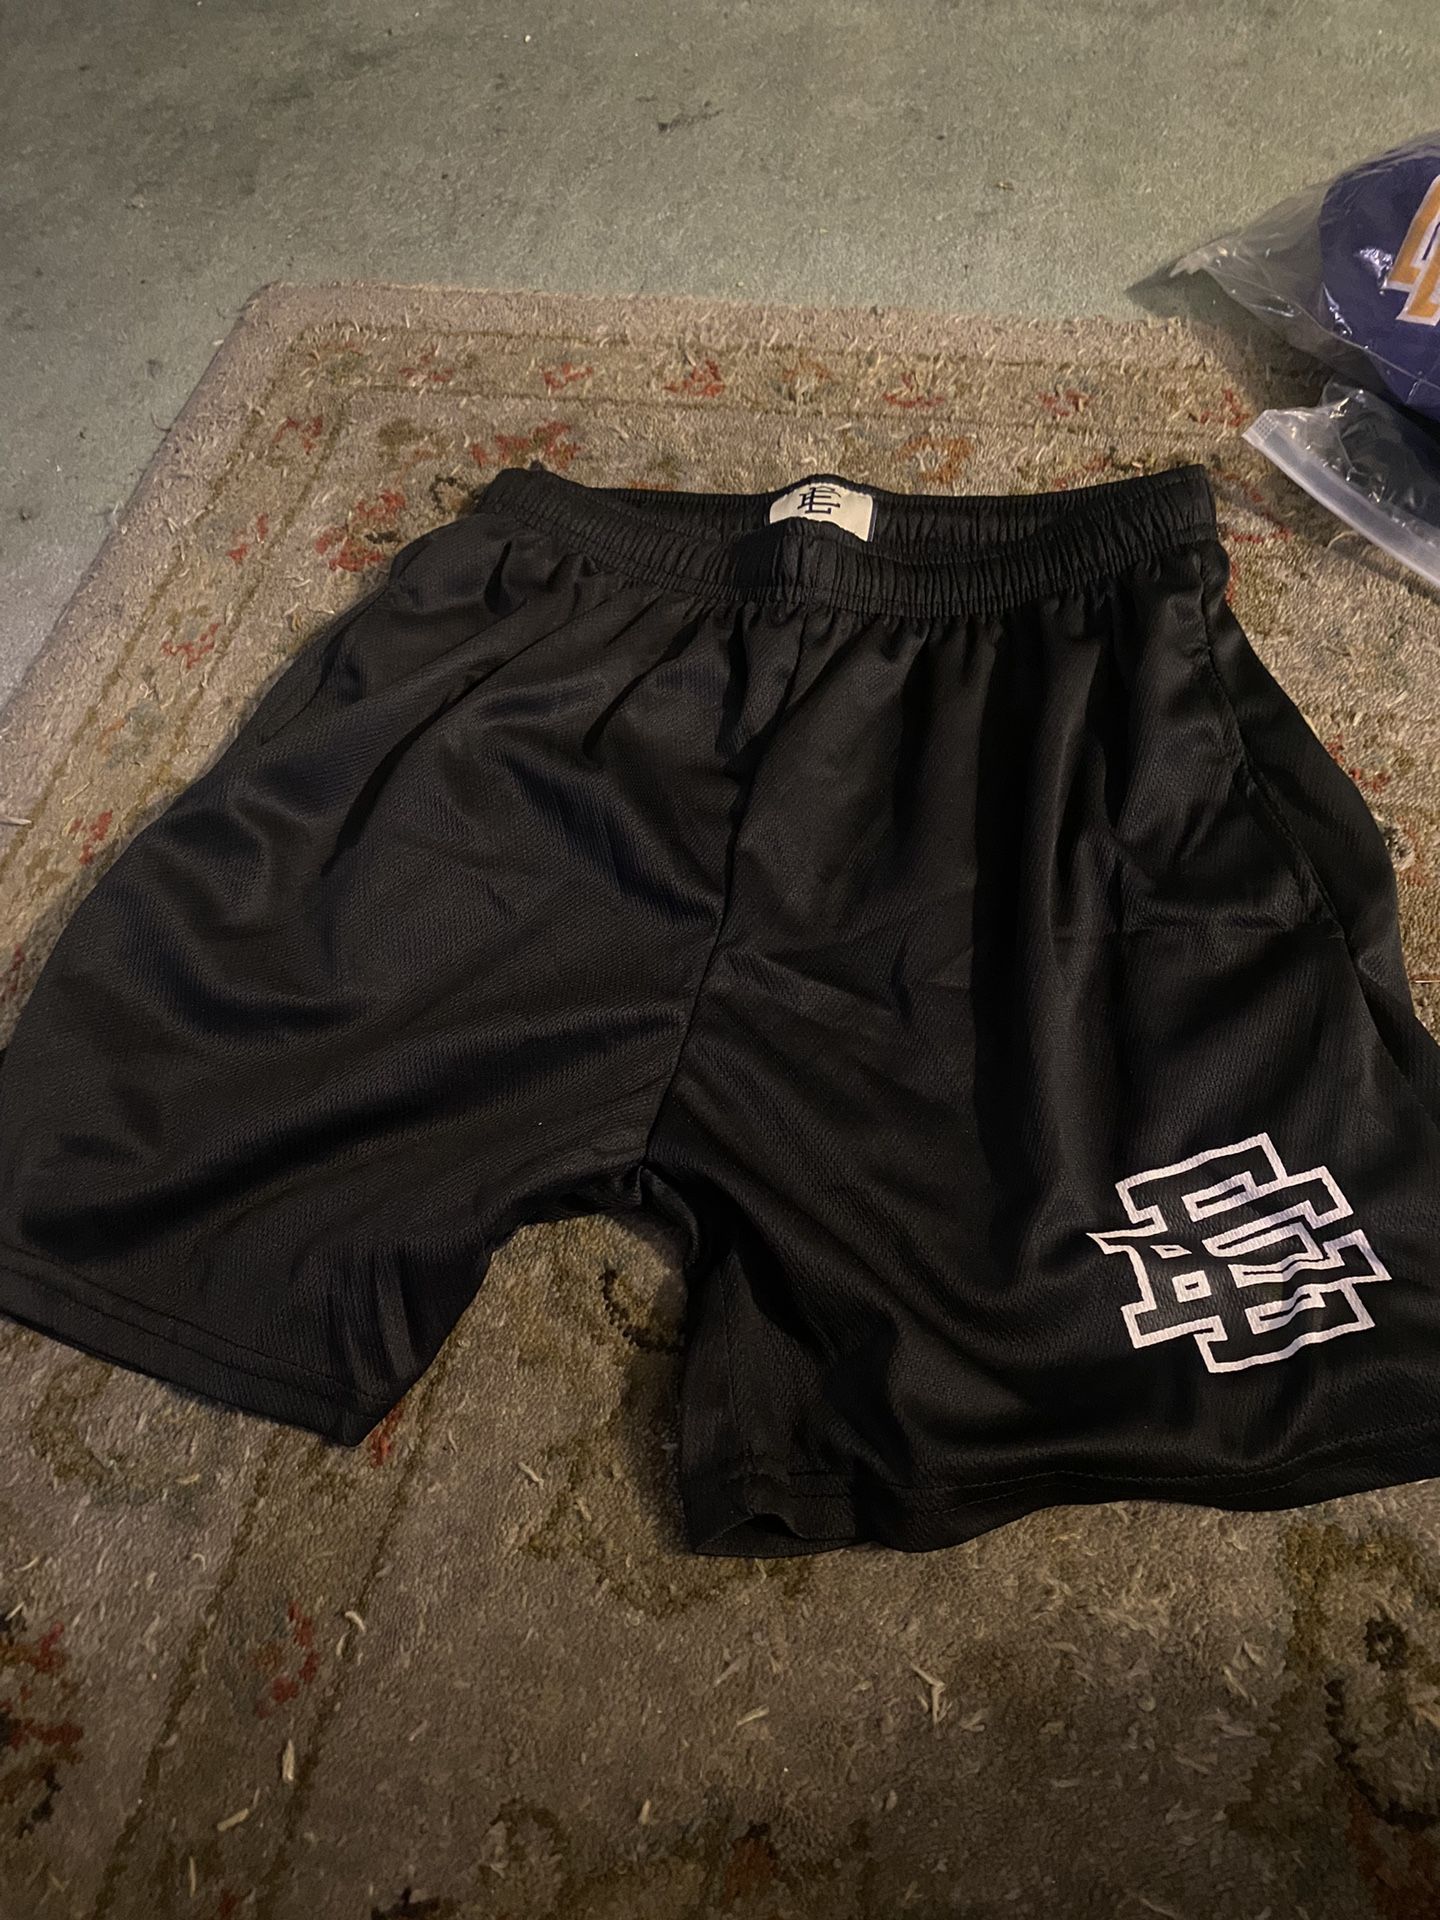 Sky Eric Emanuel Shorts for Sale in Curtice, OH - OfferUp